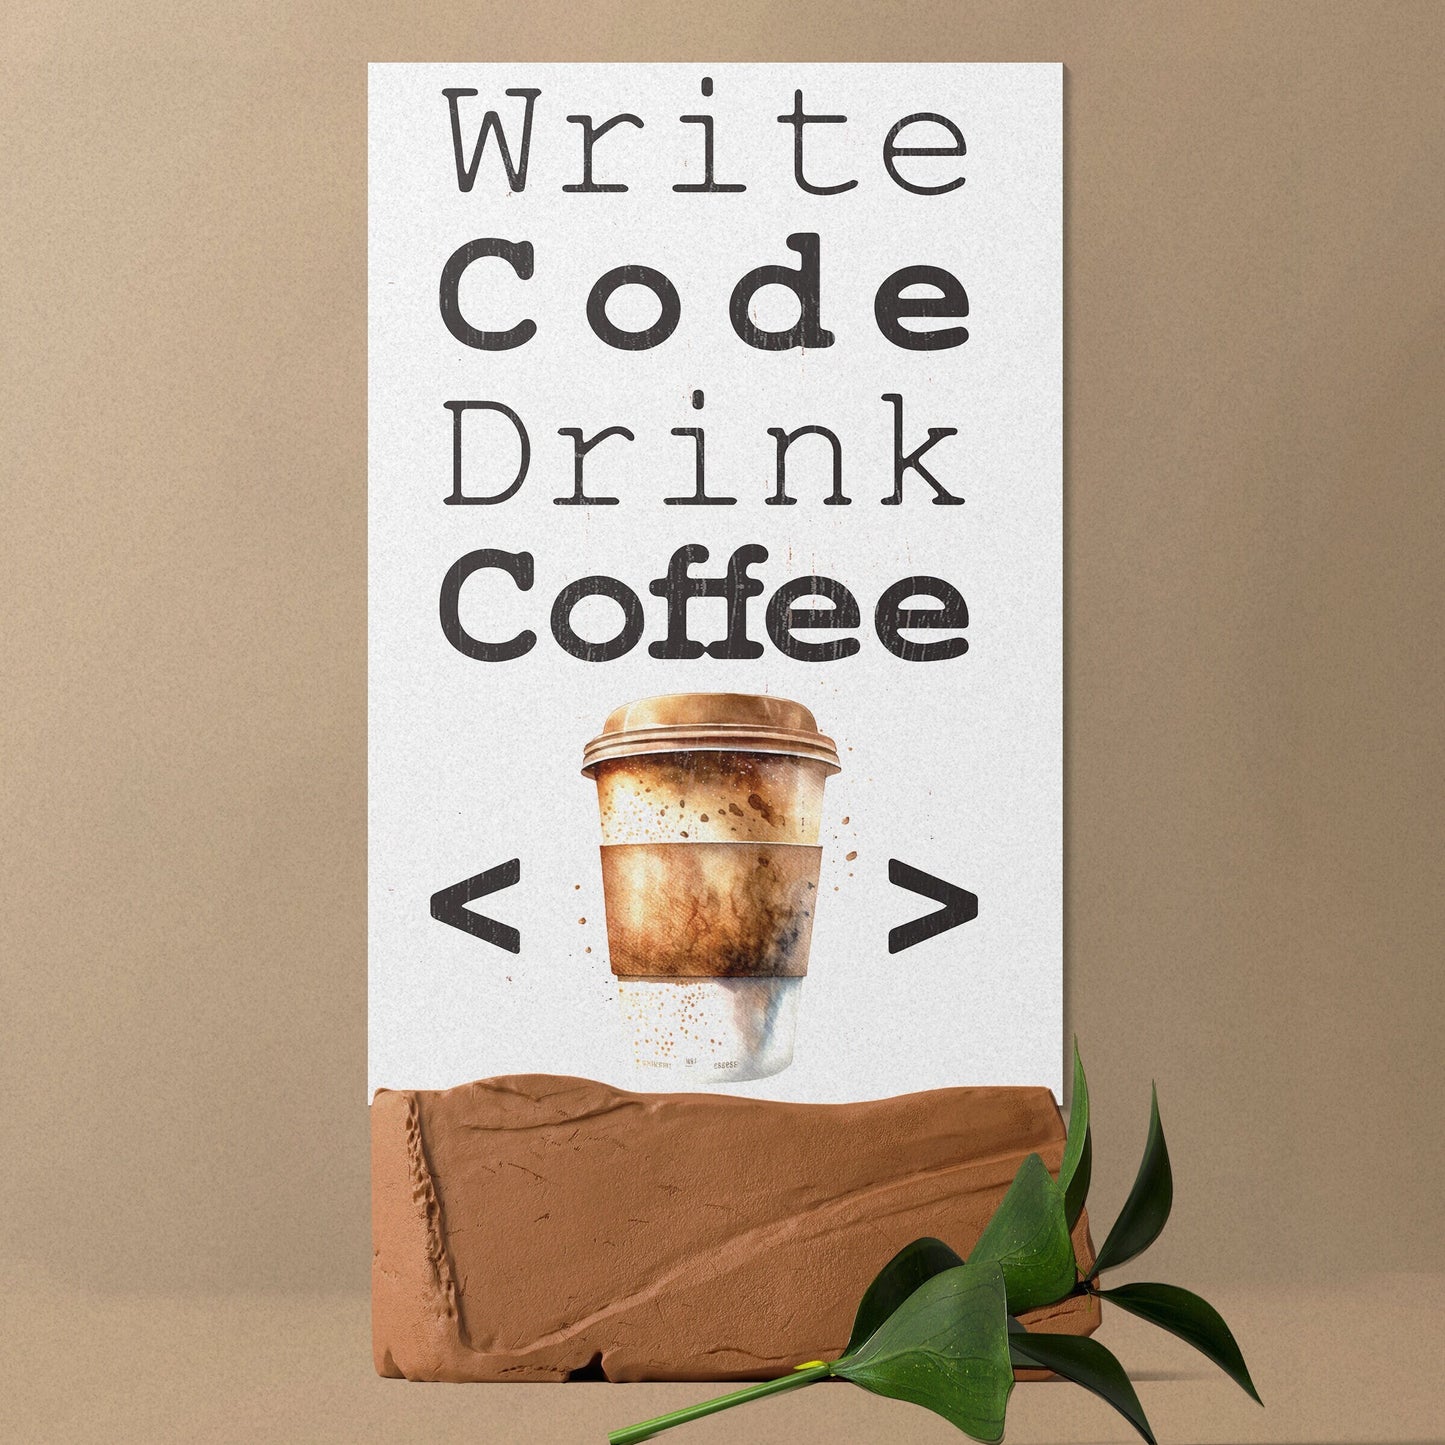 Write Code Drink Coffee - 7.5in x 5in Wooden Wall Decor Sign - Programmer's Motto for Home & Office, Perfect Gift for Developers